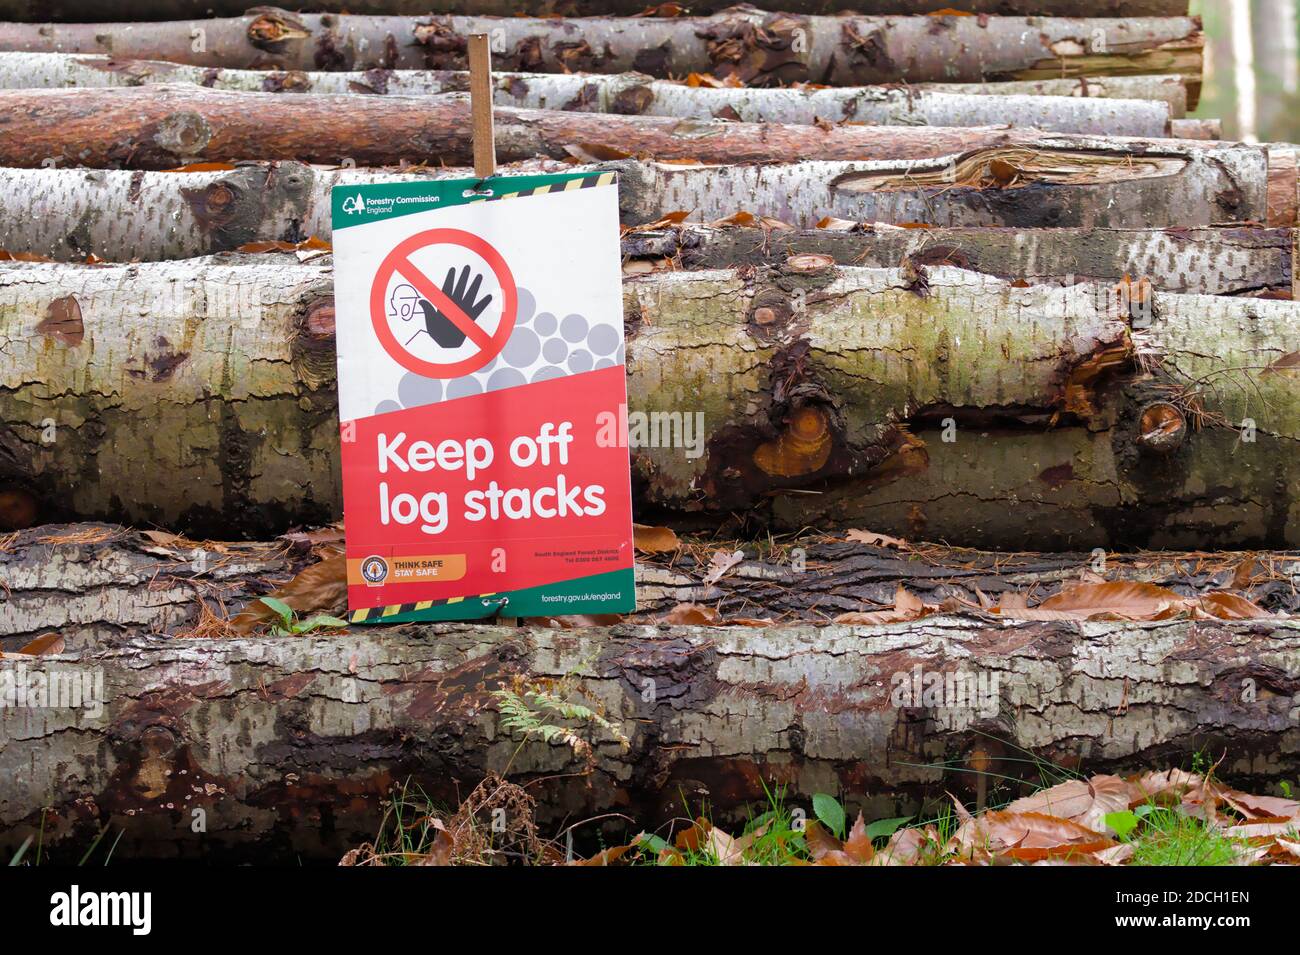 Keep Off Log Stacks Warning Sign By The Forestry Commission Fixed To A Pile Of Logs New Forest Hampshire England UK Stock Photo